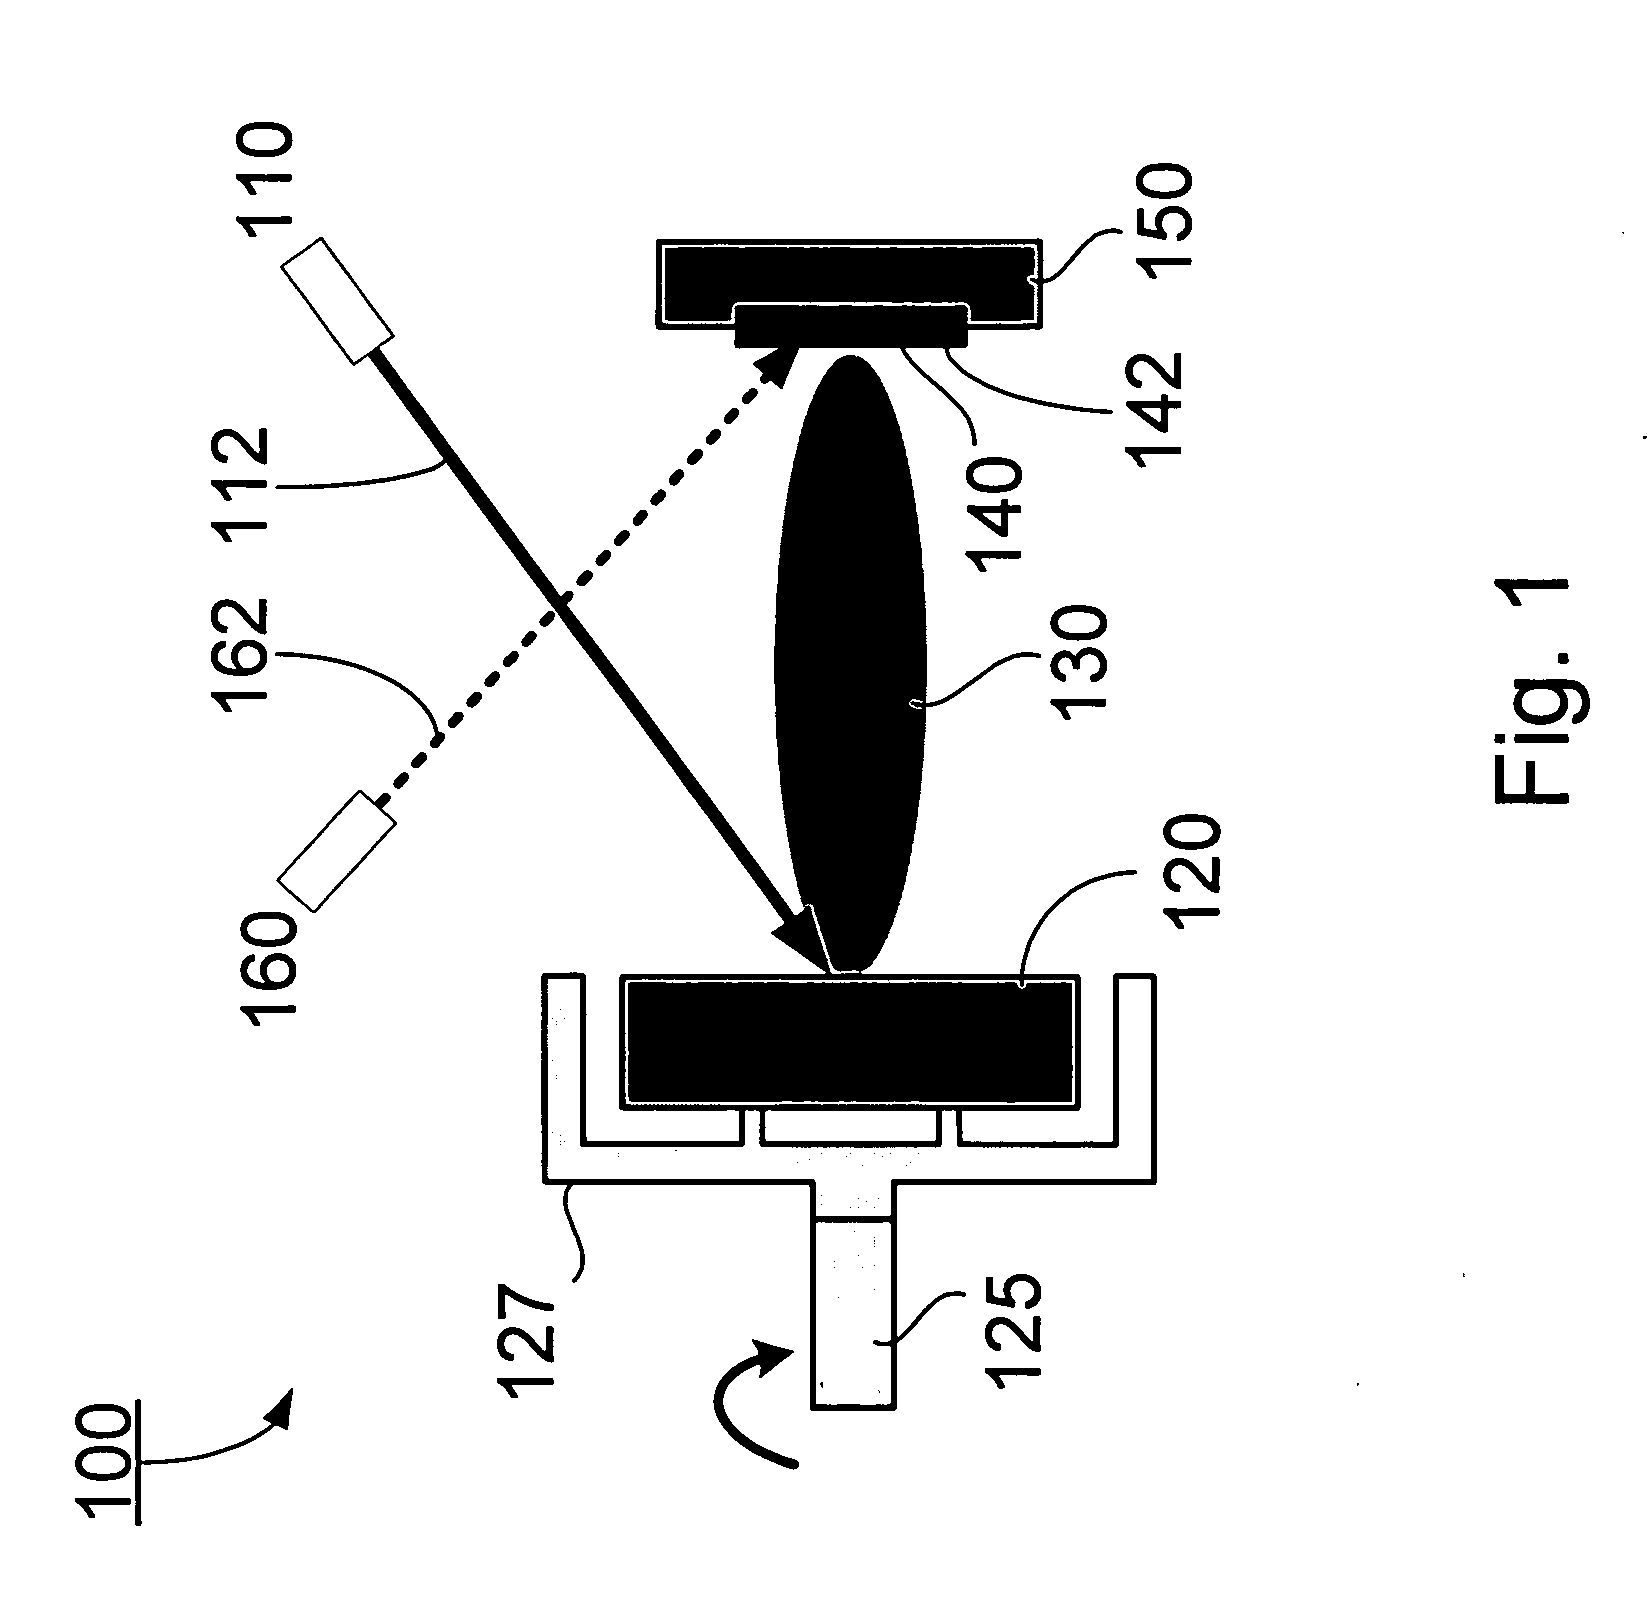 Methods and apparatus for transferring a material onto a substrate using a resonant infrared pulsed laser